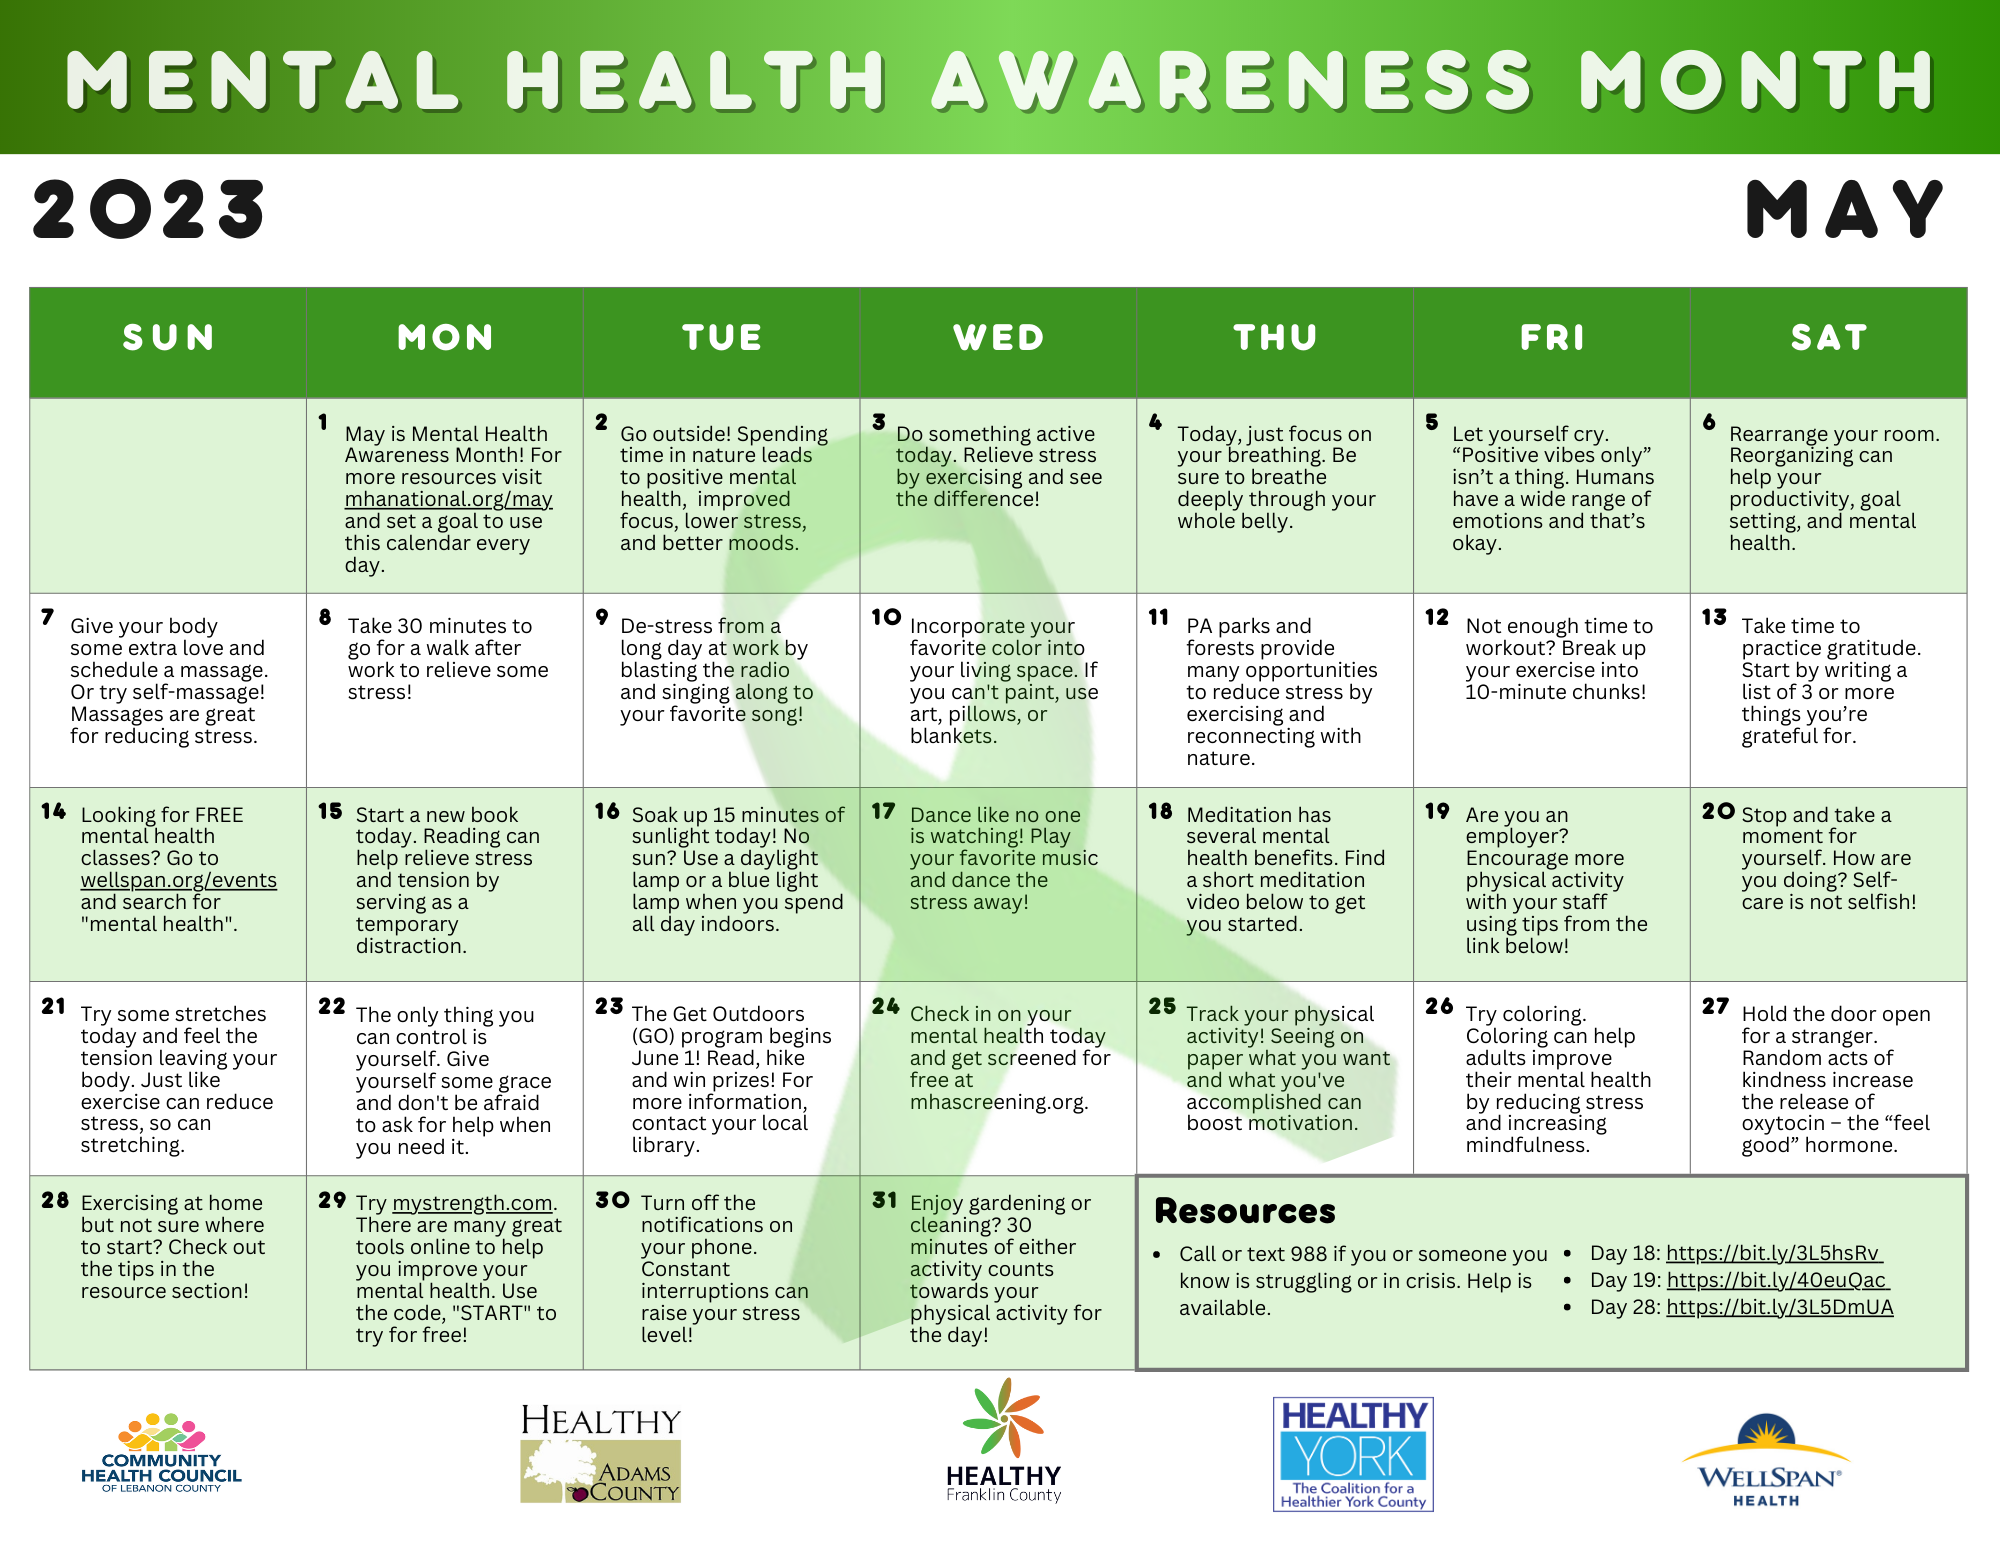 mental-health-awareness-month-2024-community-health-council-of